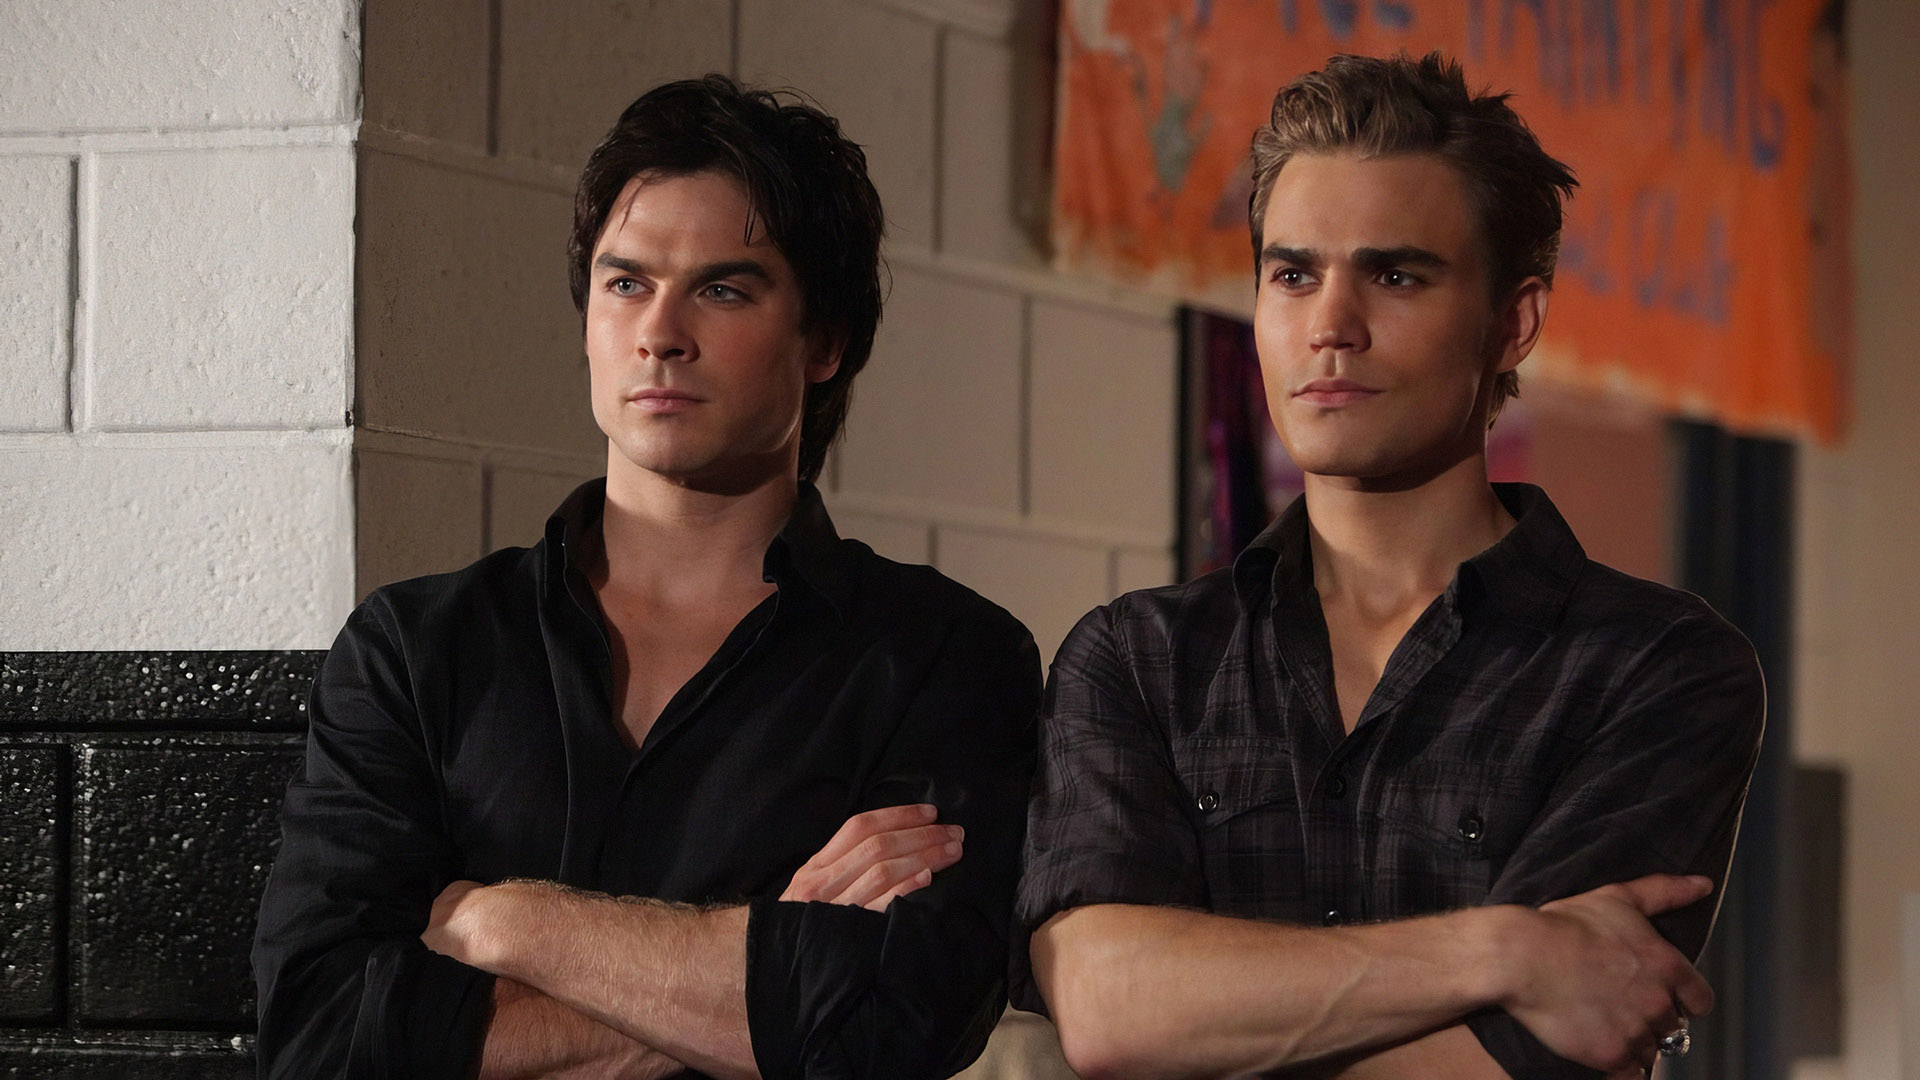 The Vampire Diaries' 5 Most Gruesome Deaths, Ranked